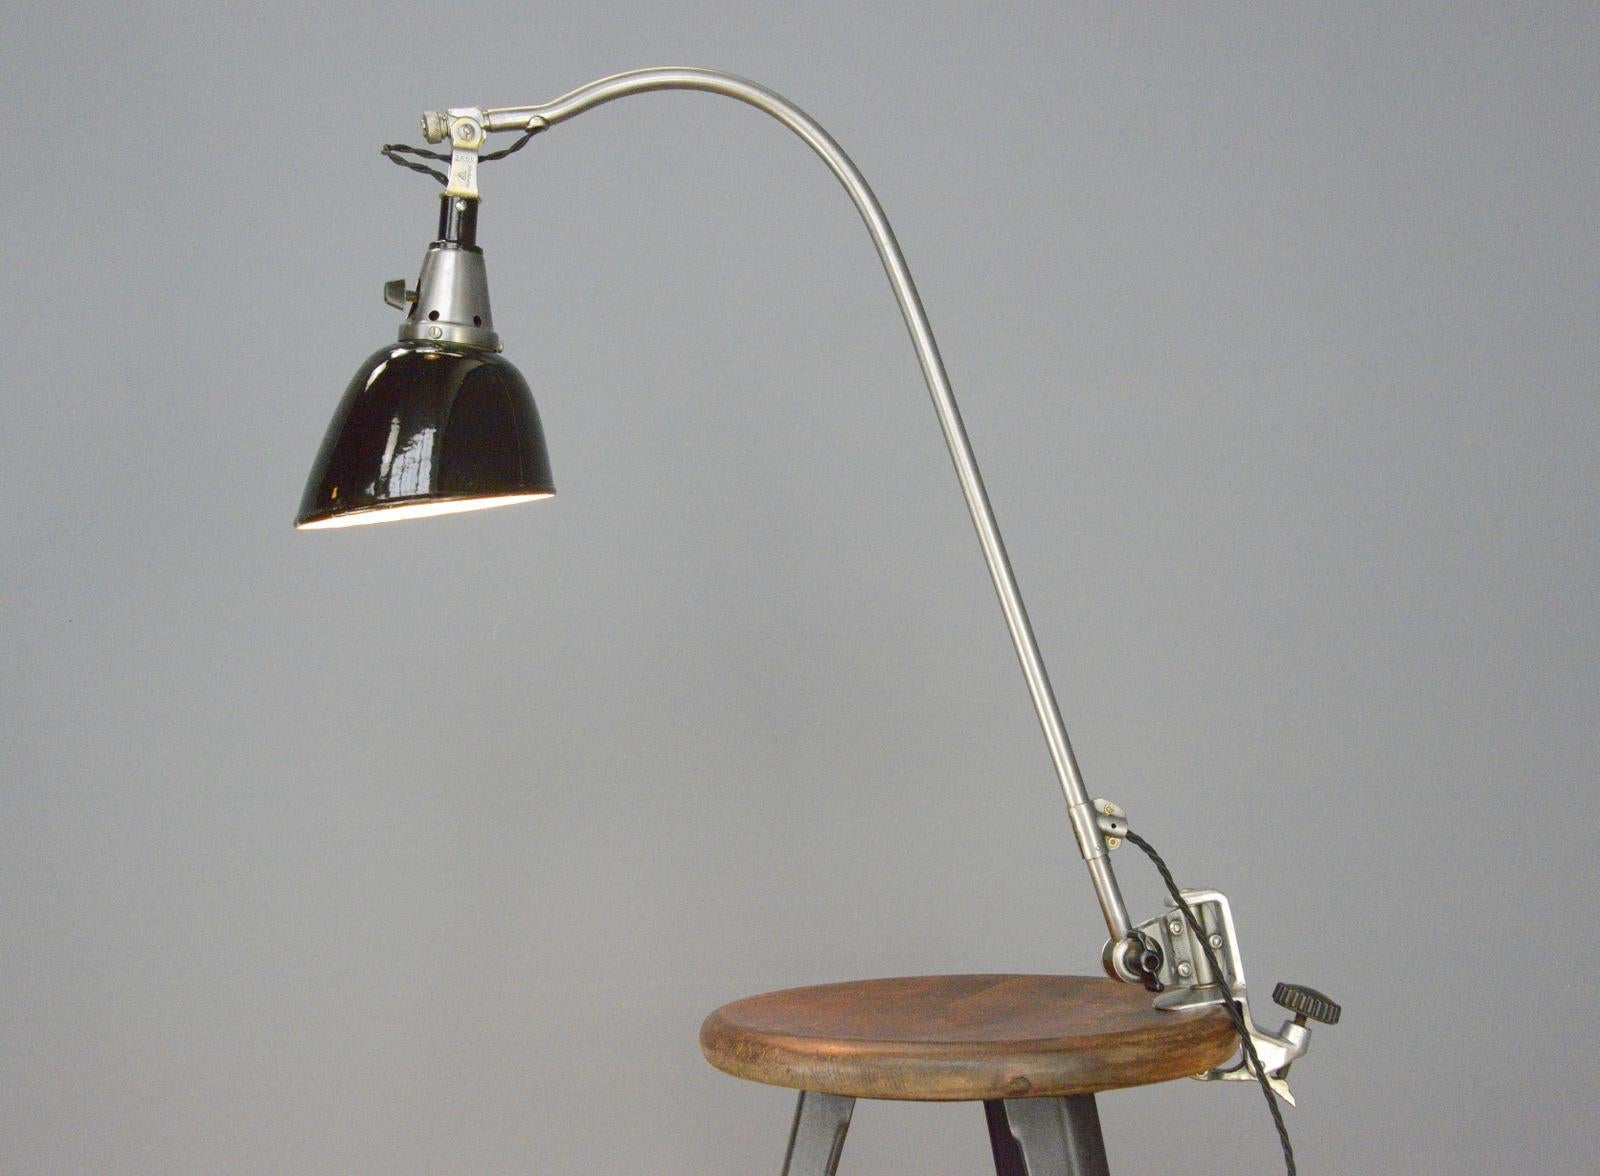 Typ 113 Peitsche Table Lamp By Curt Fischer For Midgard Circa 1930s

- Curved adjustable arm in brushed steel finish
- Angled steel shade in original black enamel finish
- Takes E27 fitting bulbs
- Designed by Curt Fischer
- Typ 113 the